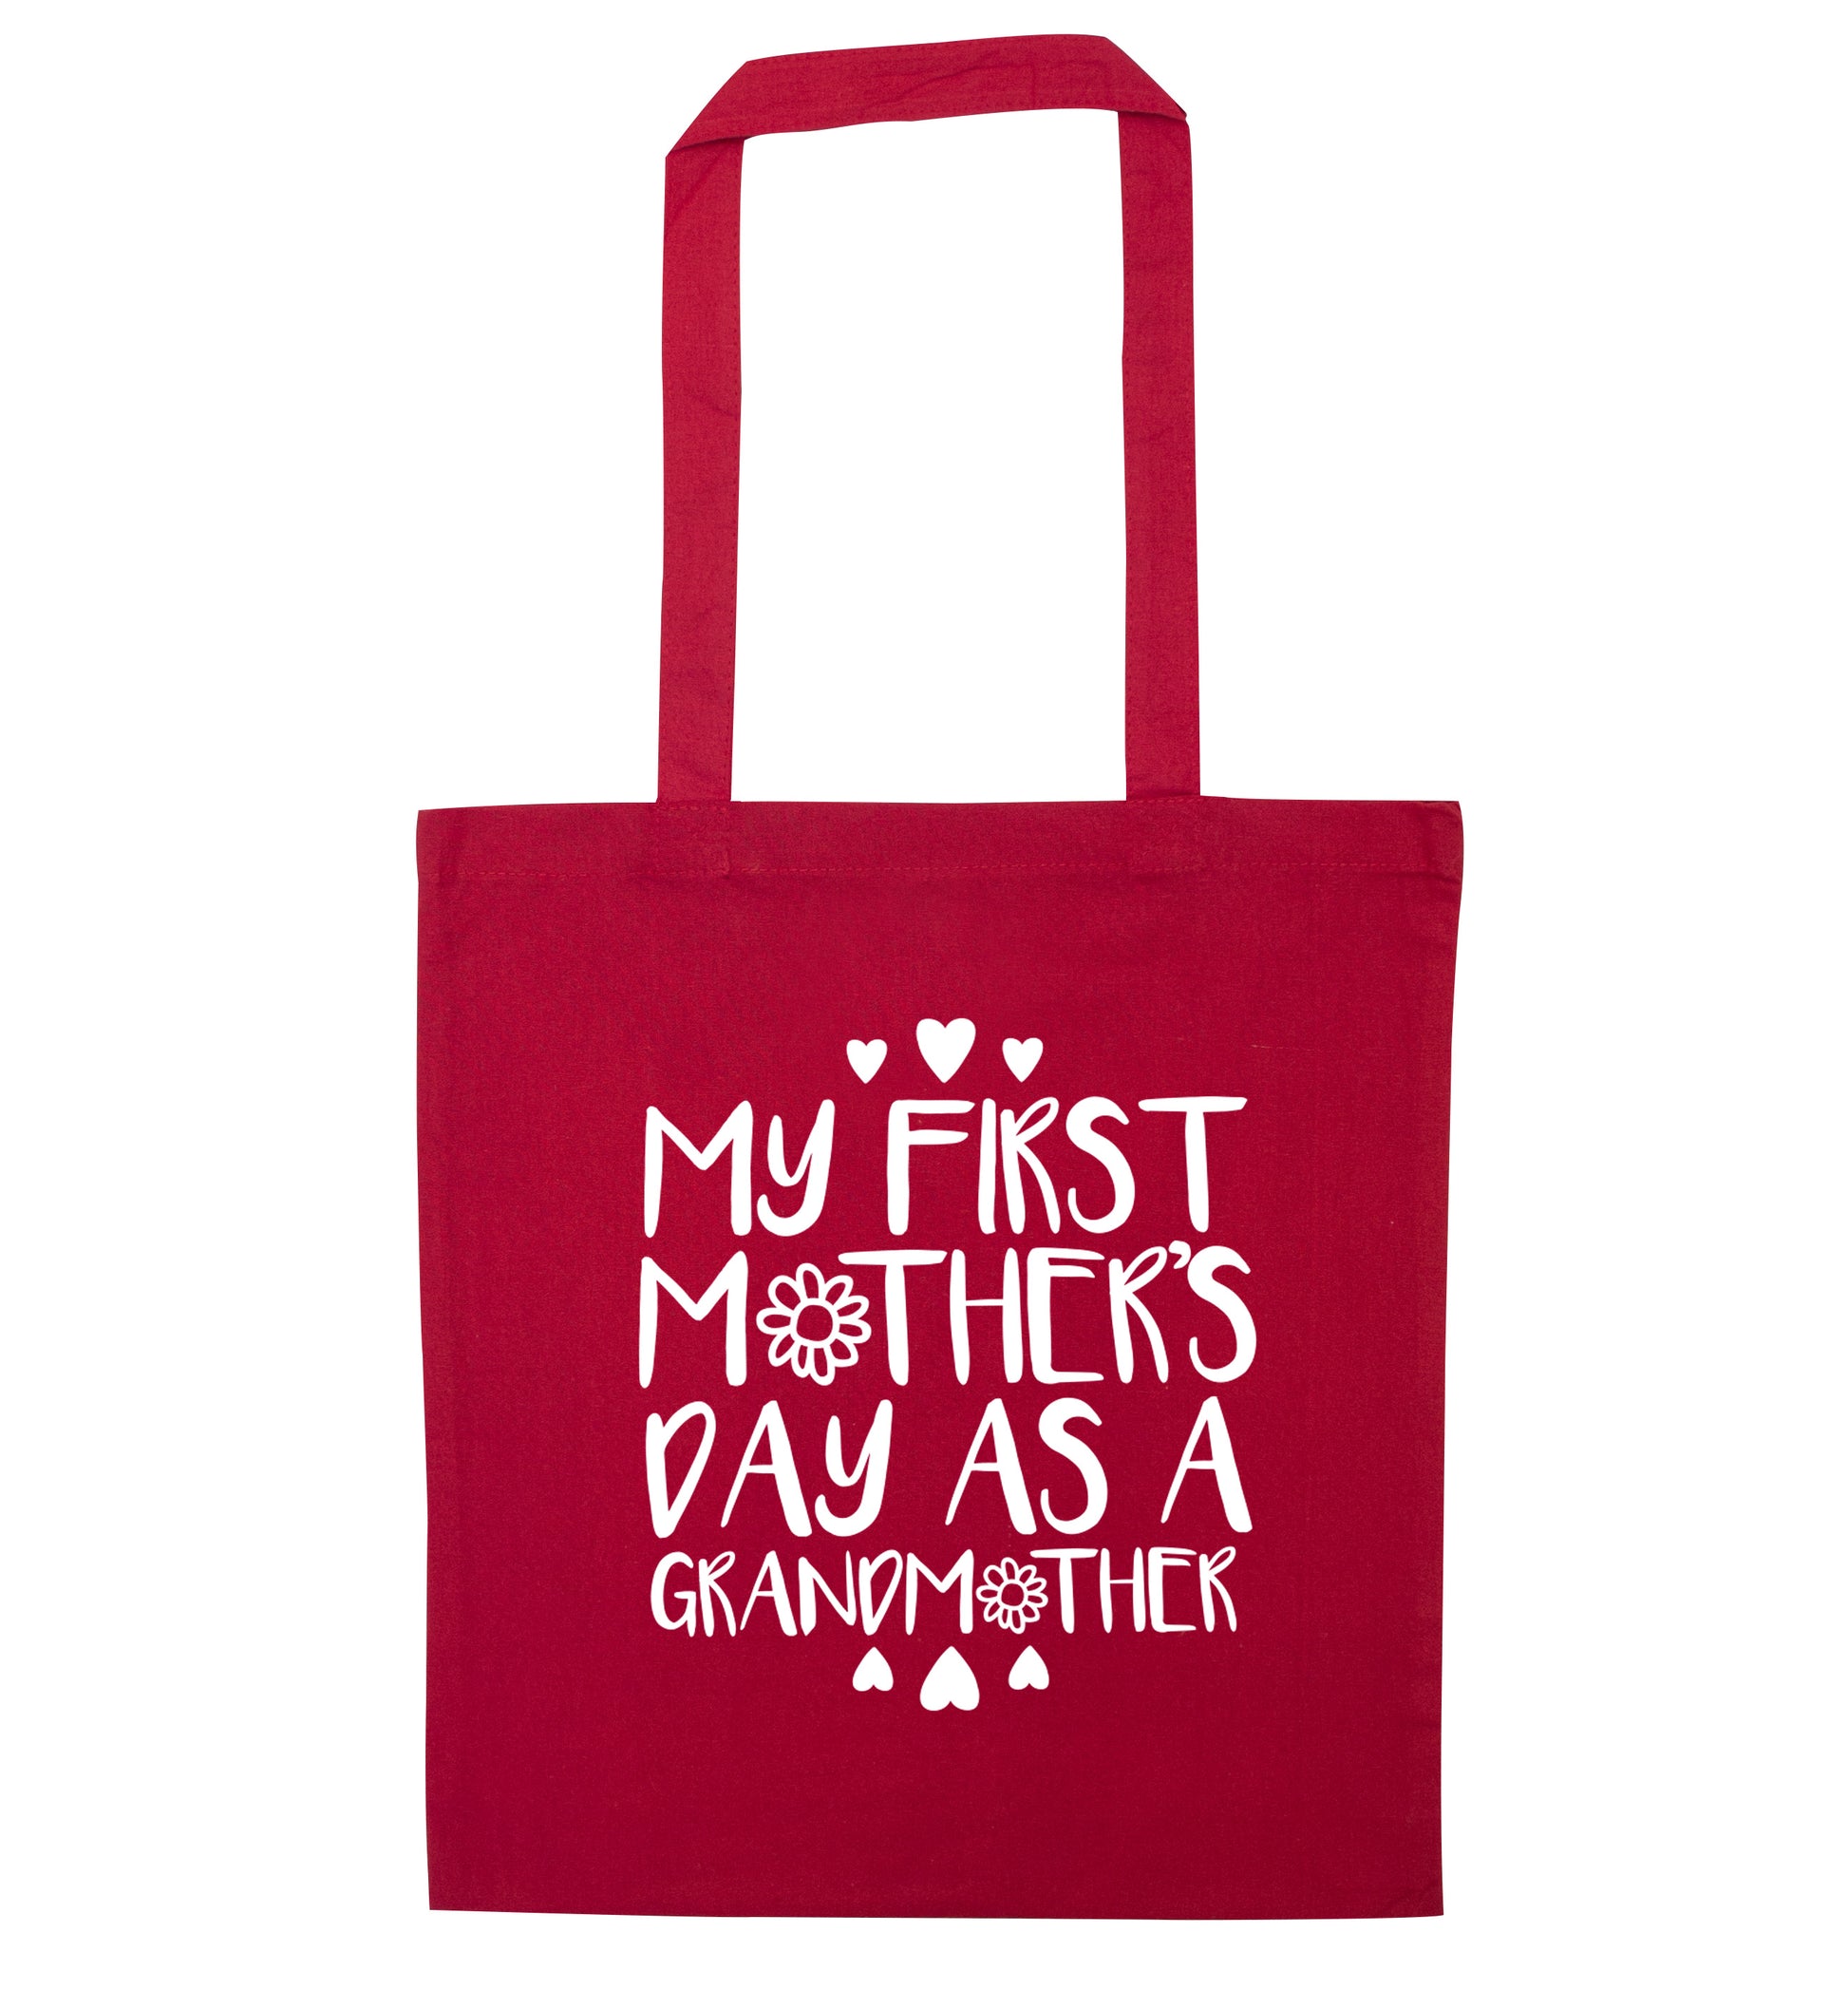 My first mother's day as a grandmother red tote bag